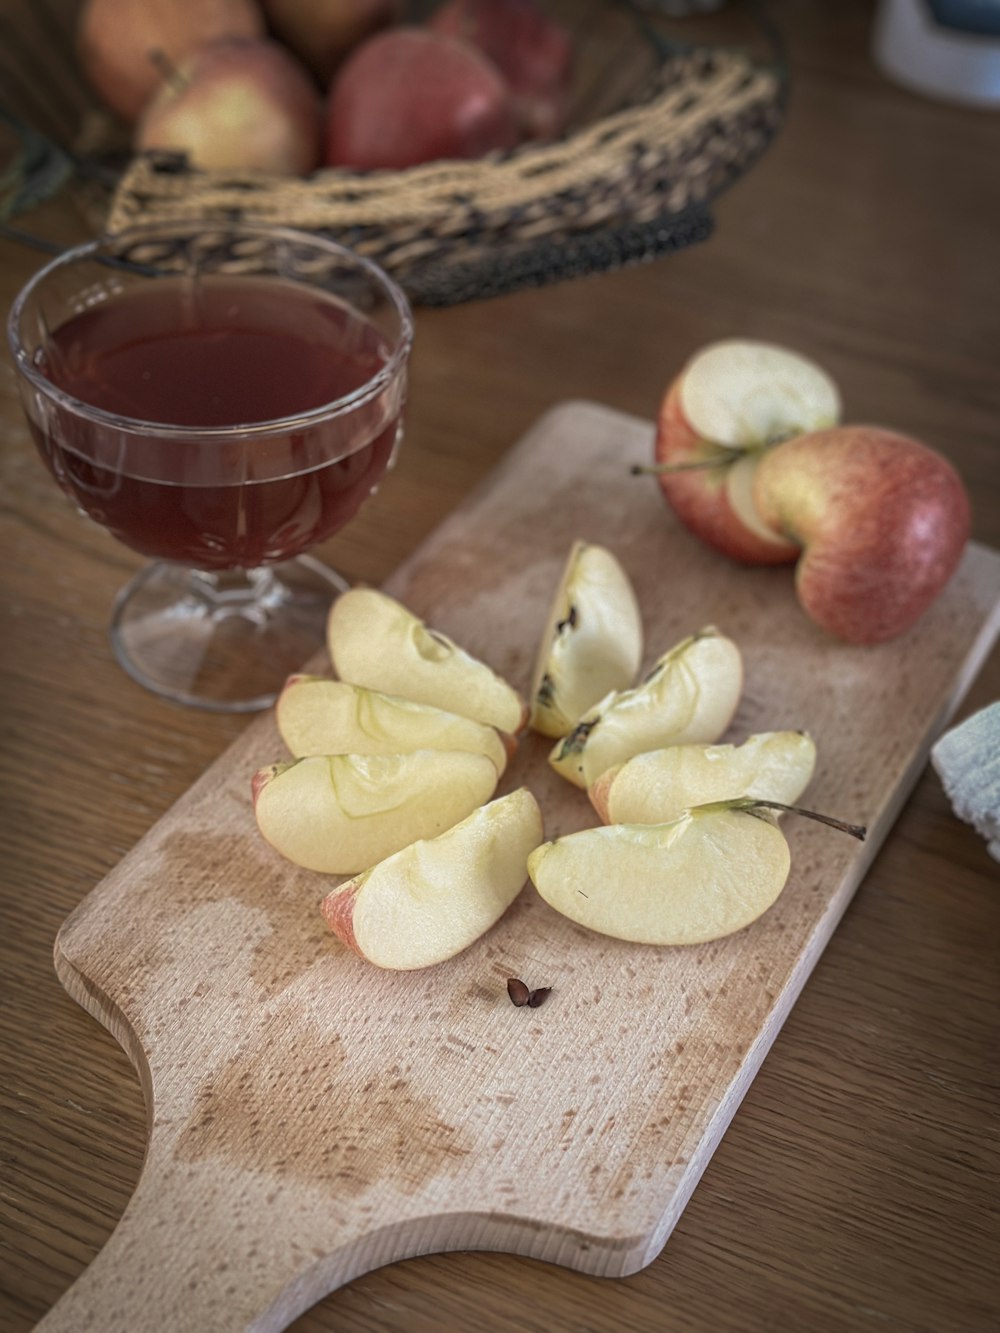 a wooden cutting board topped with apples next to a glass of wine